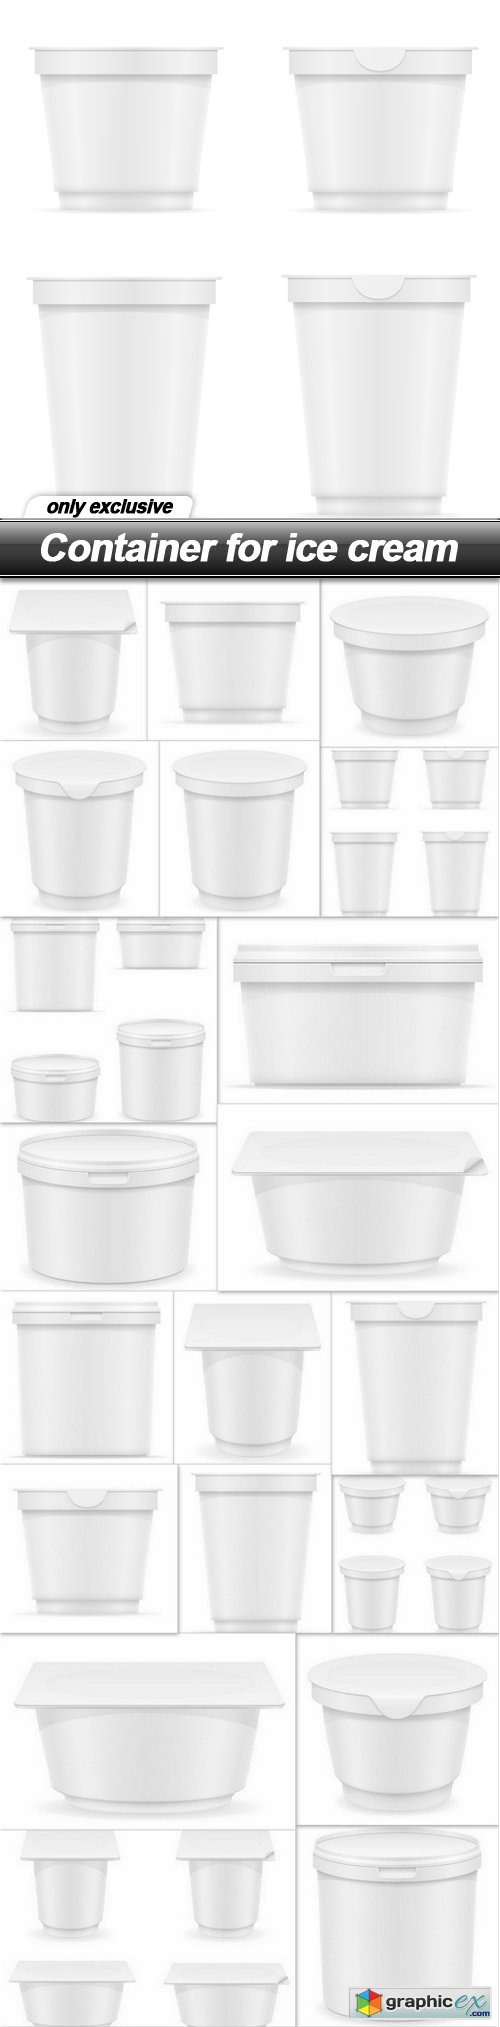 Container for ice cream - 20 EPS